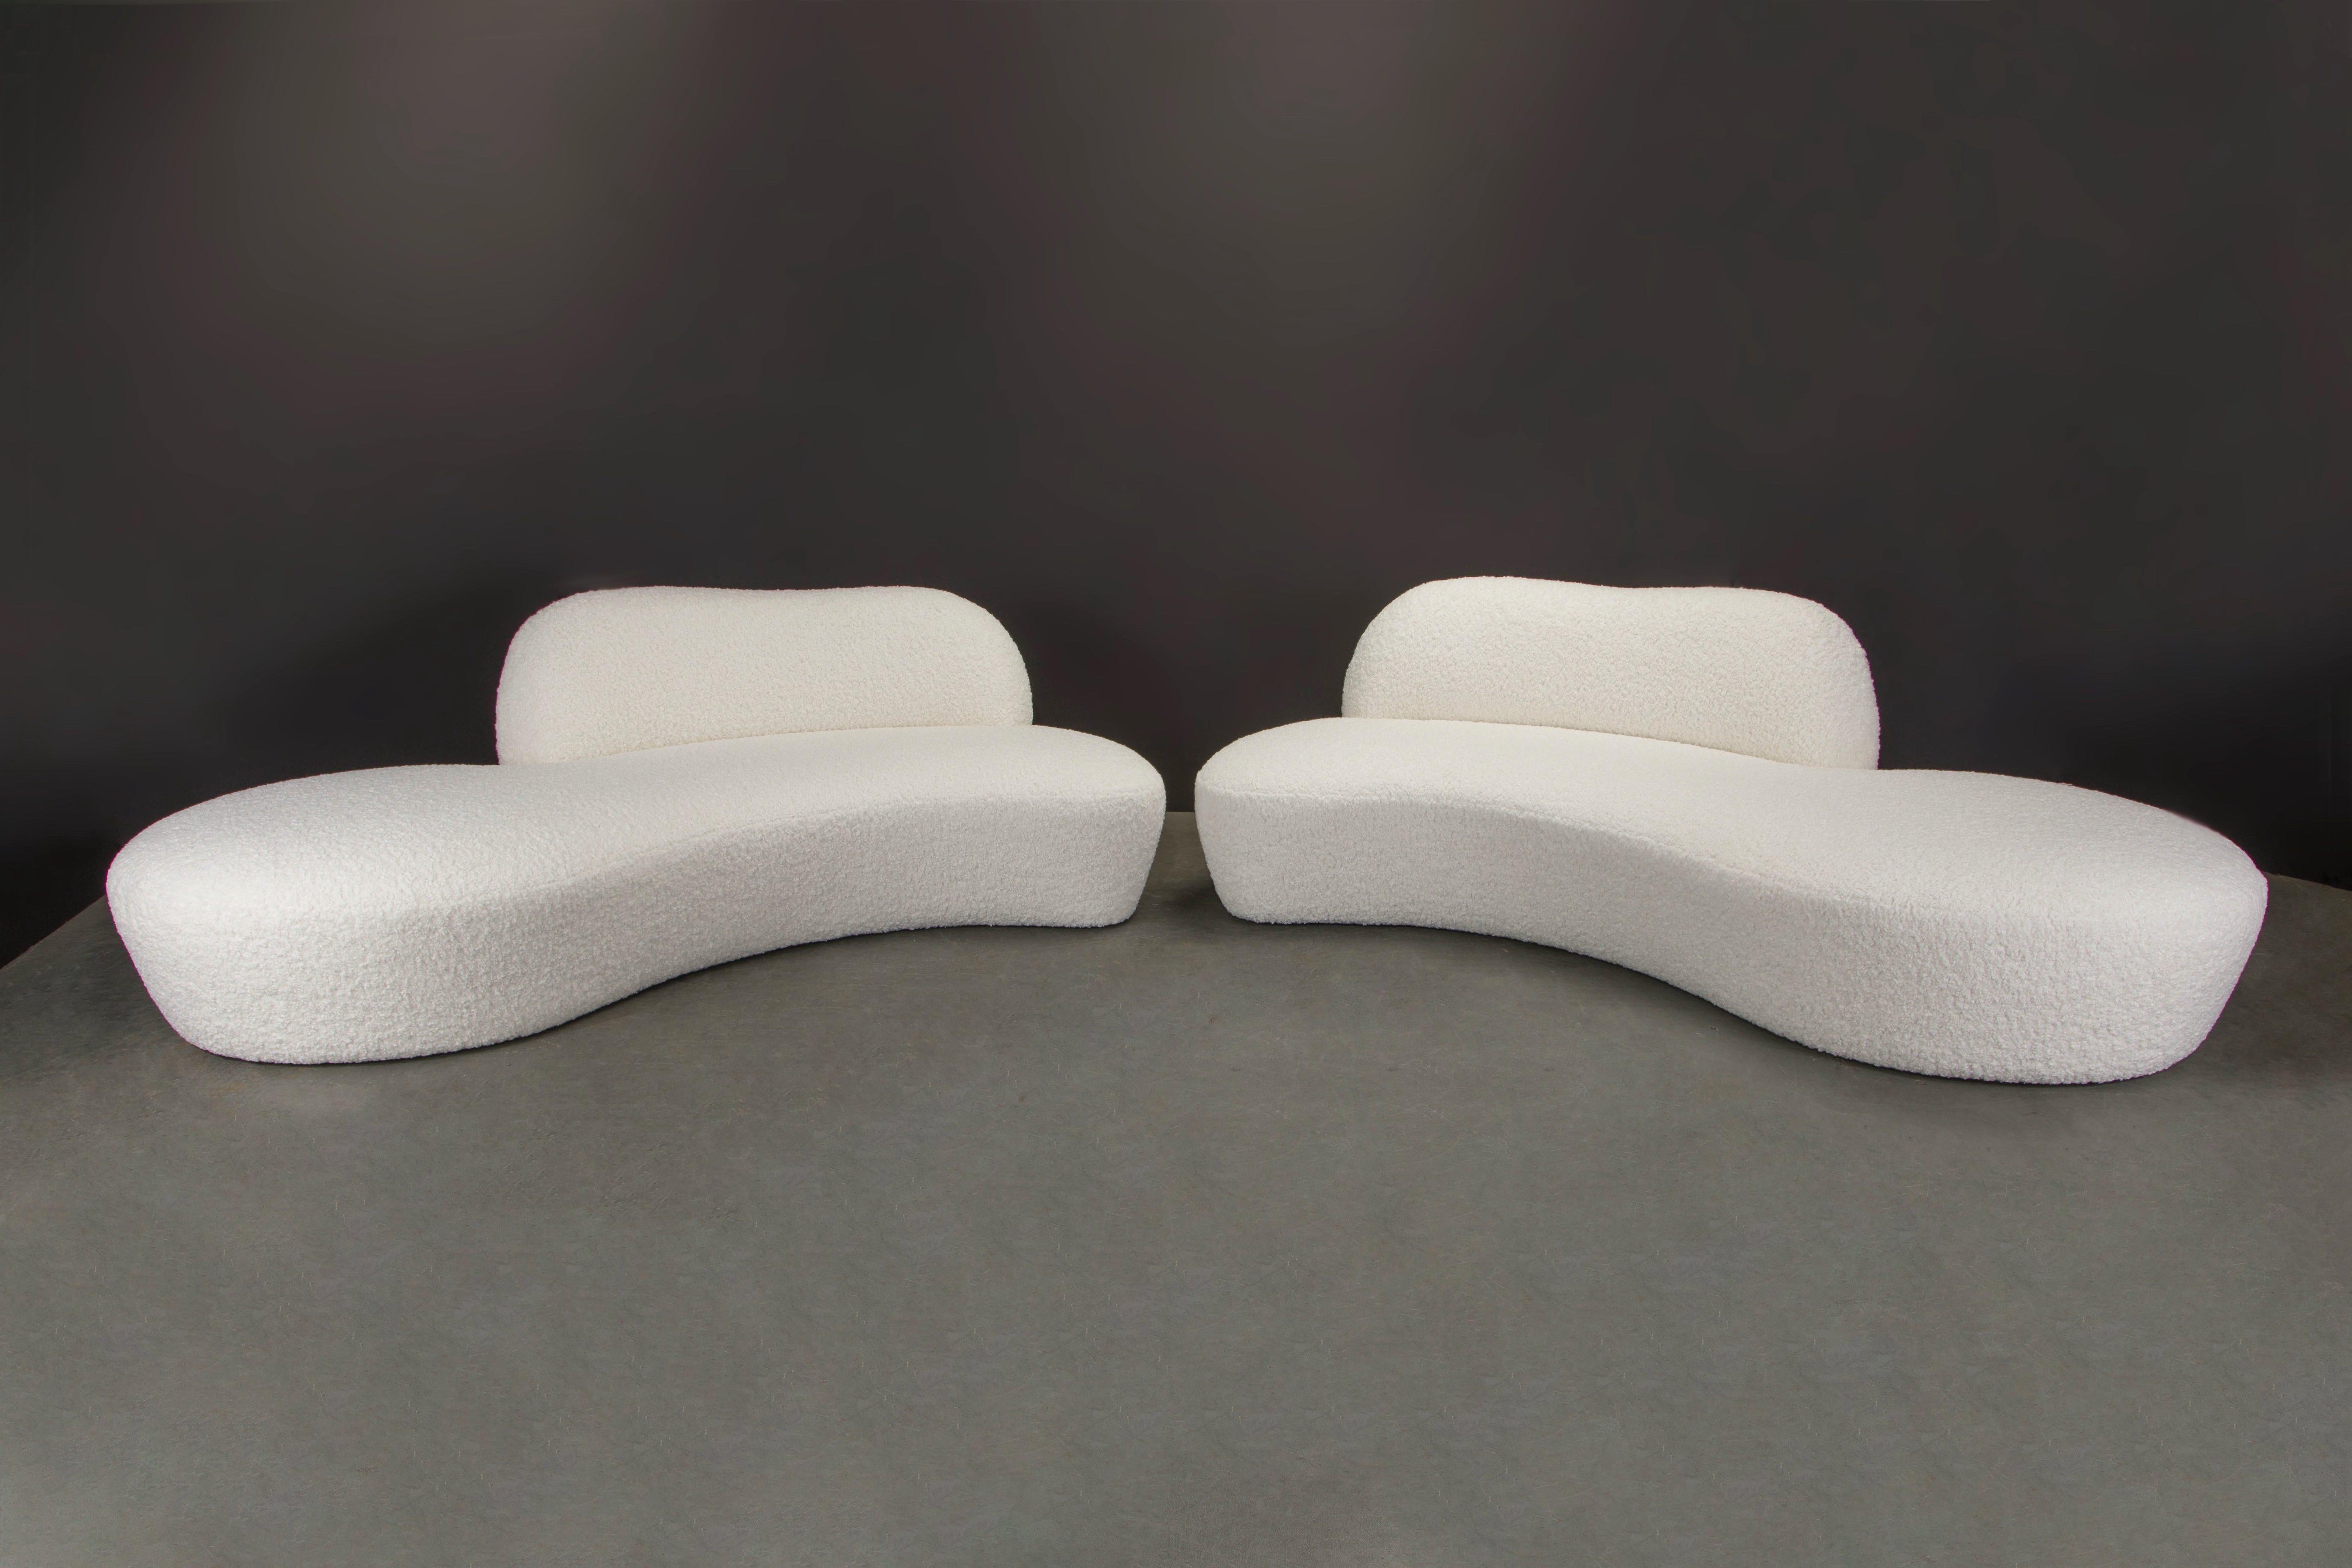 This spectacular pair of Vladimir Kagan 'Zoe' sofas were produced by American Leather for a short time, circa early 2000's, and was just reupholstered in a gorgeous white bouclé fabric (brand new fabric), signed underneath with American Leather